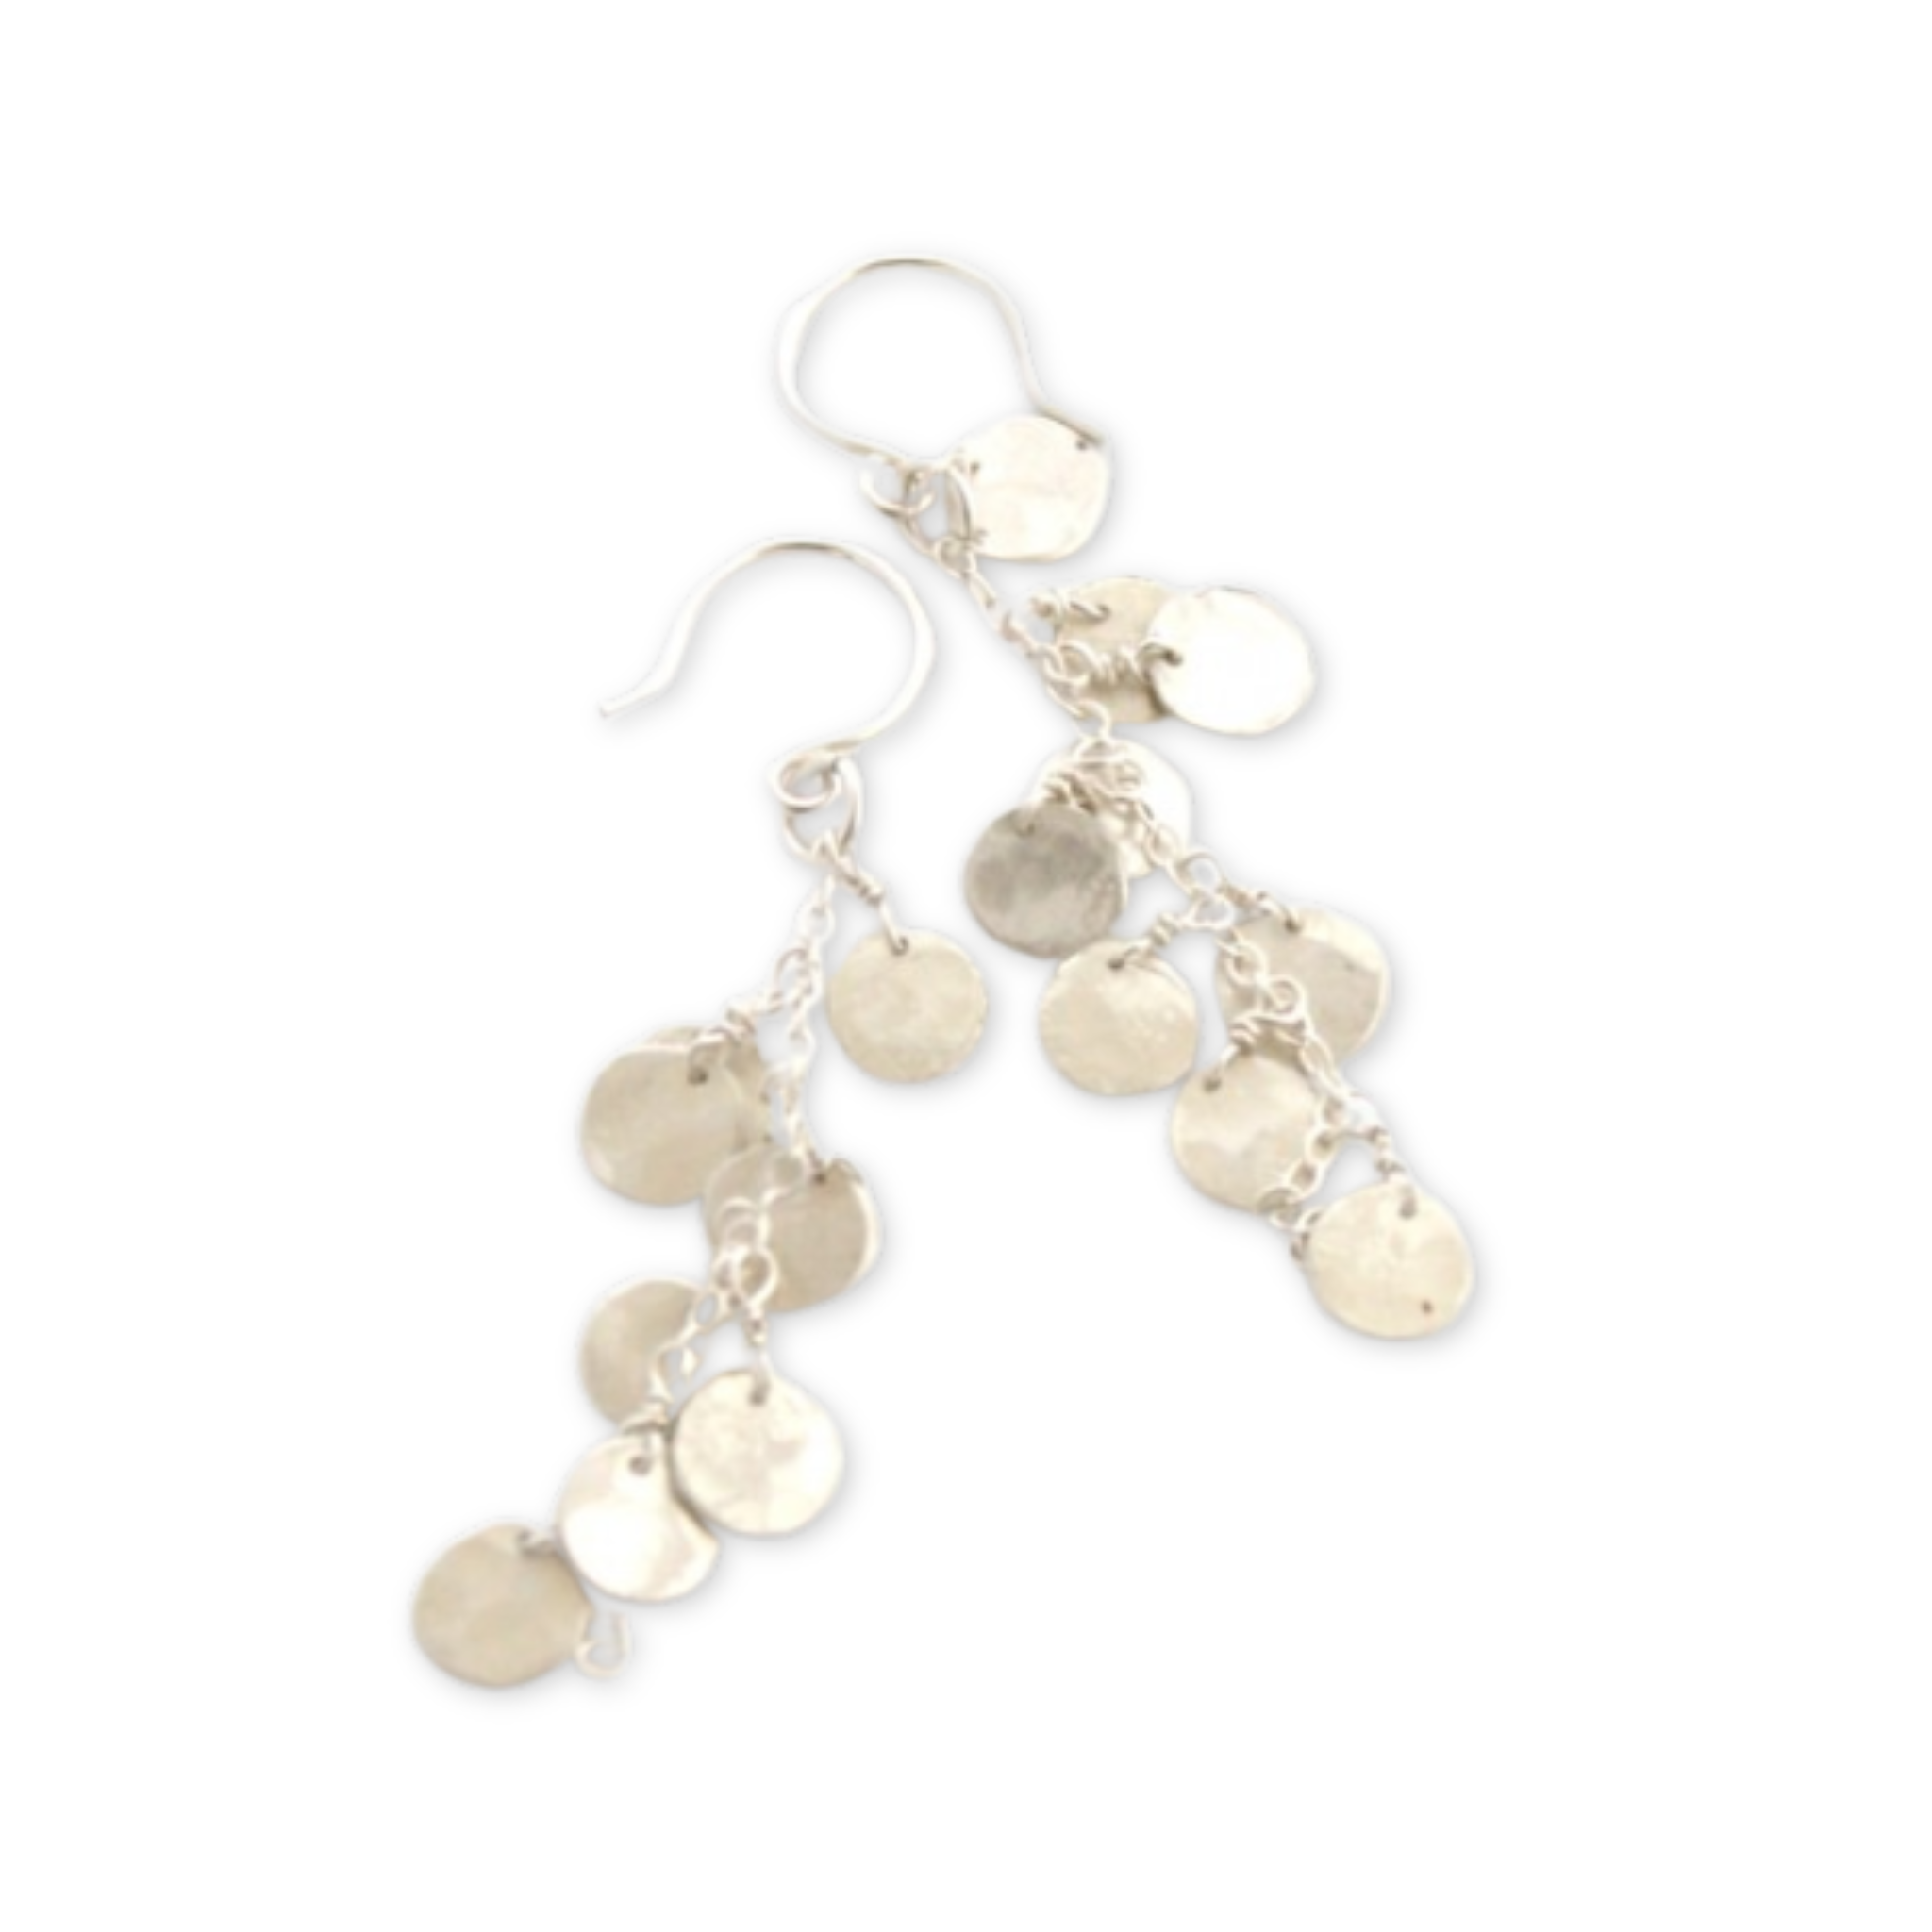 a pair of earrings with clusters of small hand cut hammered discs hanging on a chain